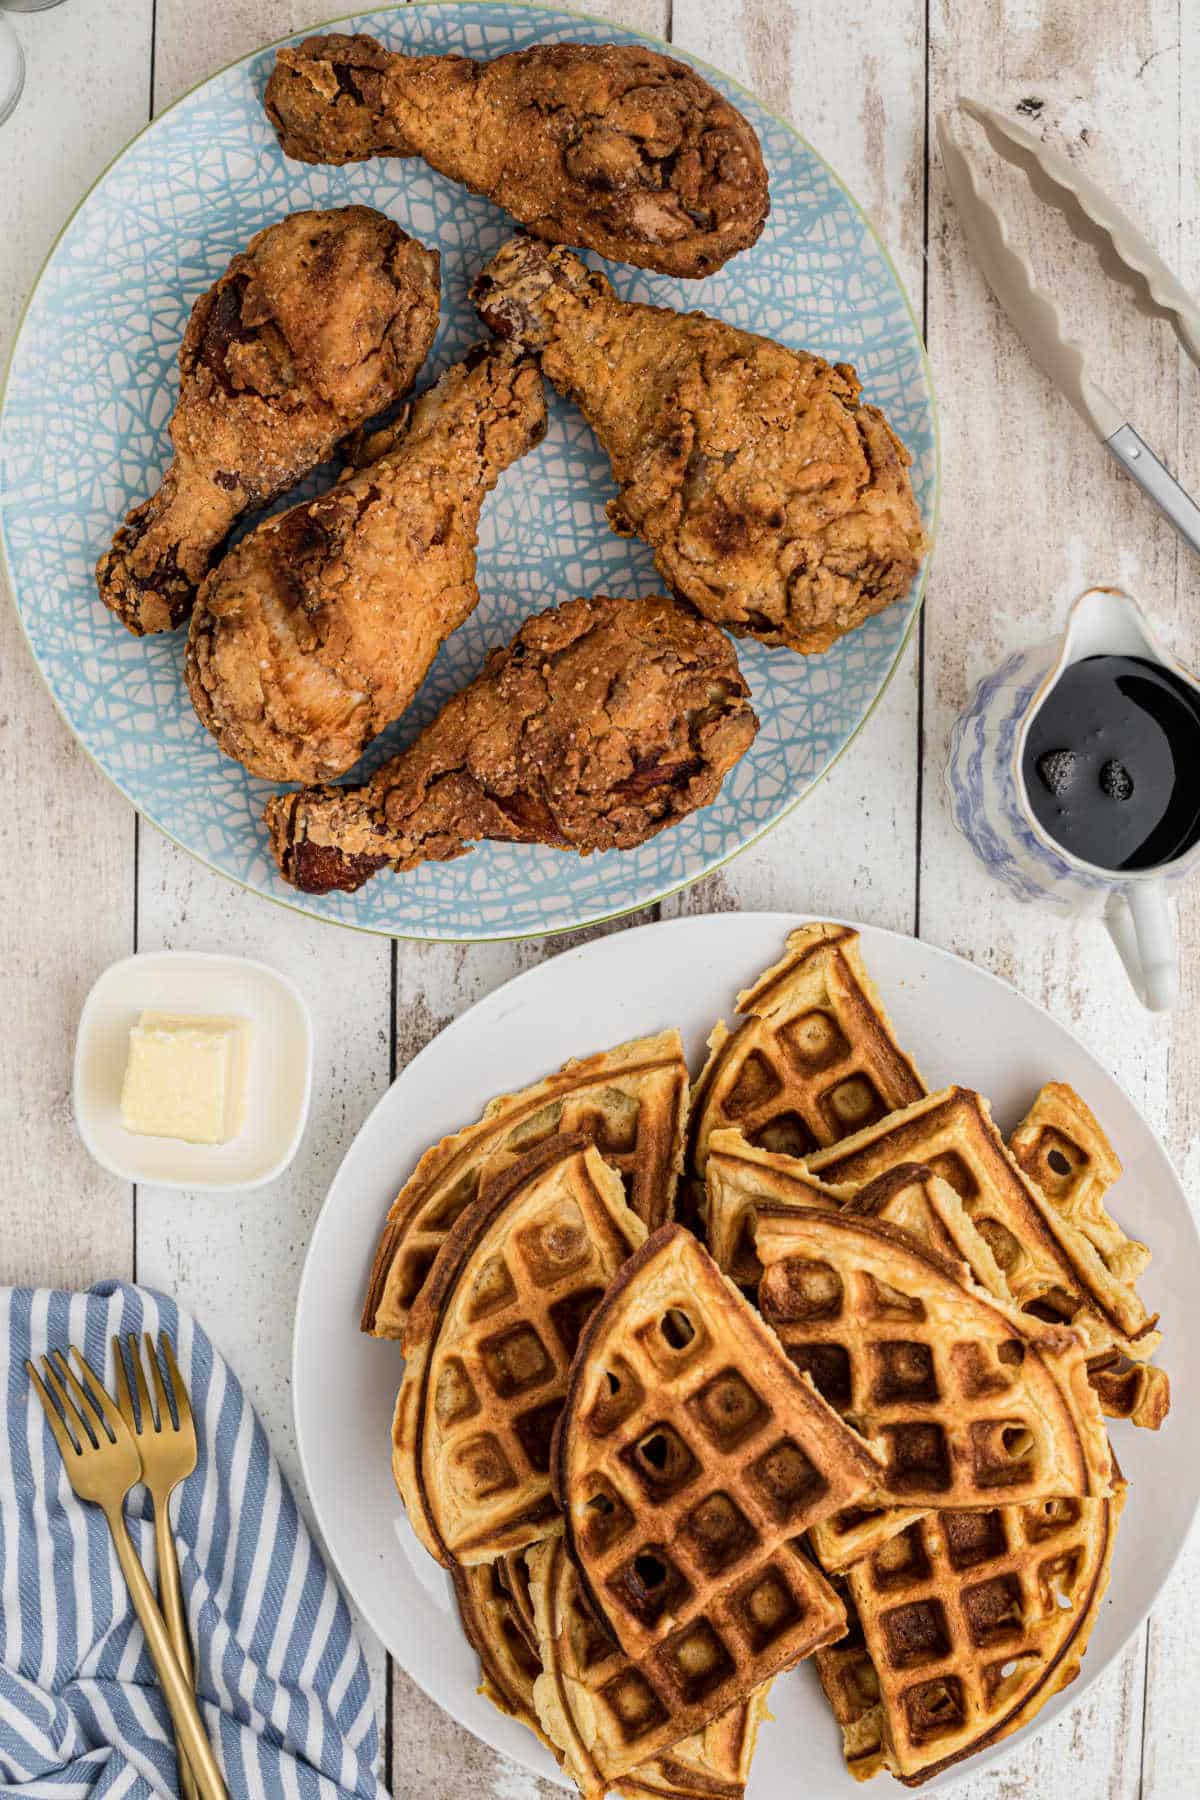 country style chicken and waffles on platters ready to be served